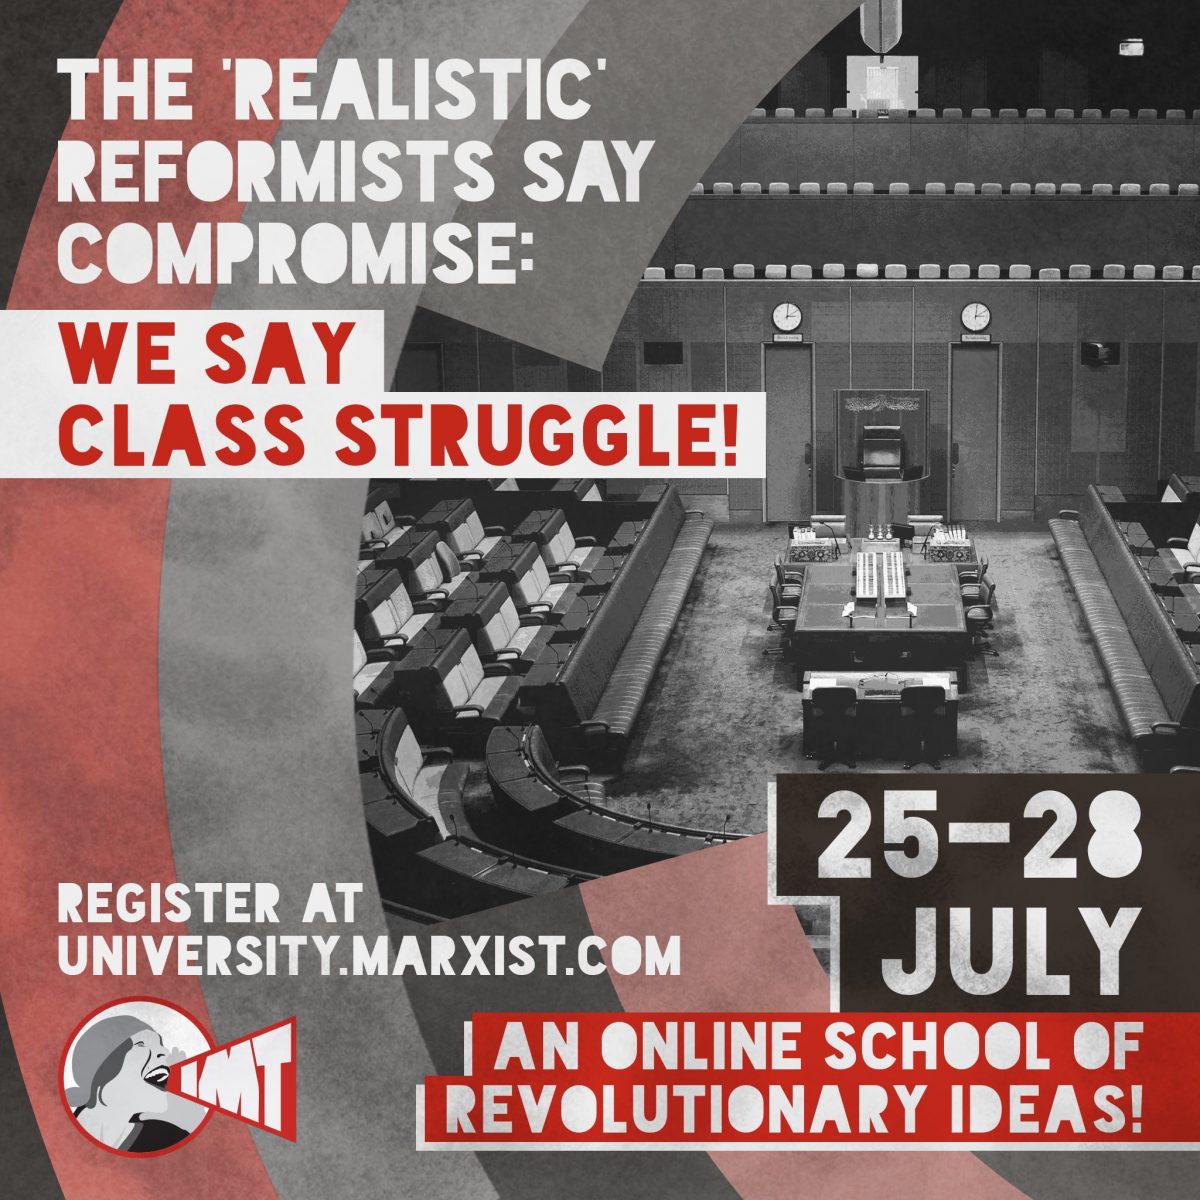 CLASS COLLABORATION, COMPROMISE AND THE CRISIS OF REFORMISM